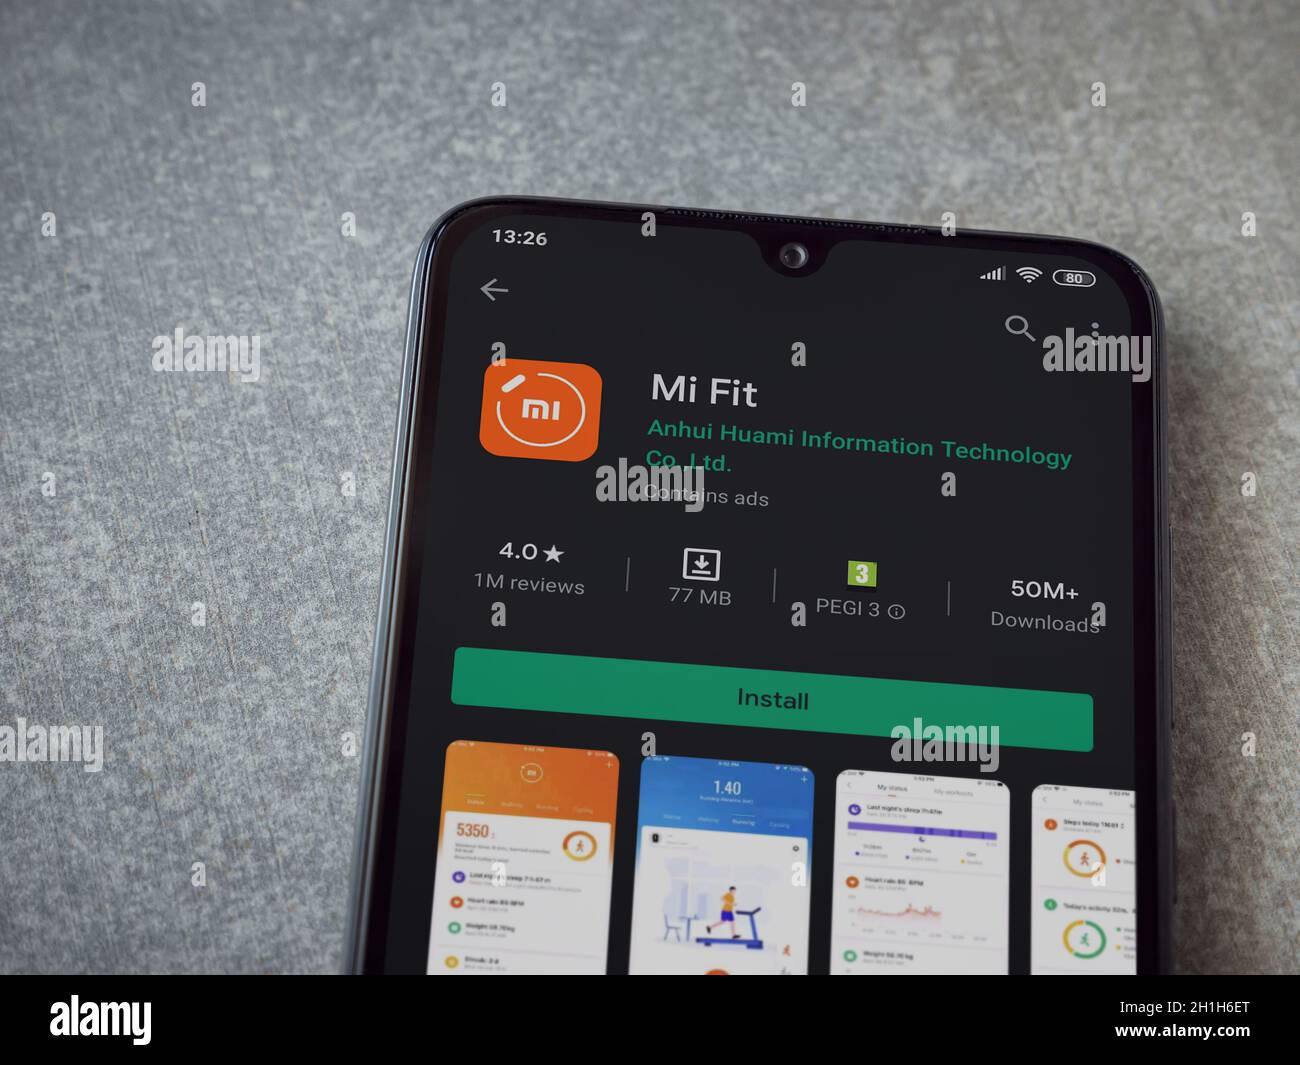 Lod, Israel - July 8, 2020: Mi Fit app play store page on the display of a  black mobile smartphone on ceramic stone background. Top view flat lay with  Stock Photo - Alamy